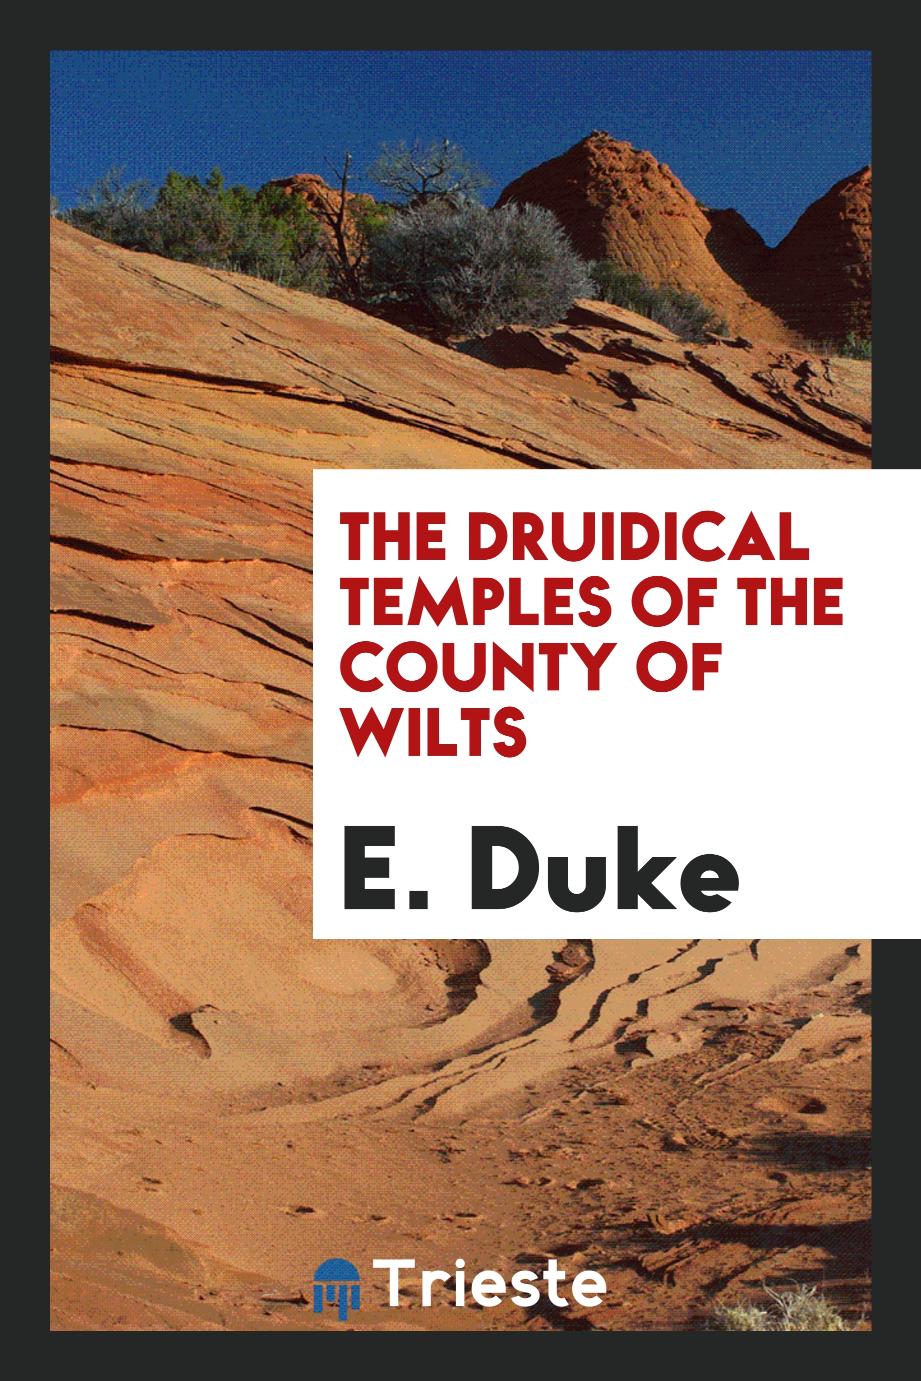 E. Duke - The Druidical Temples of the County of Wilts